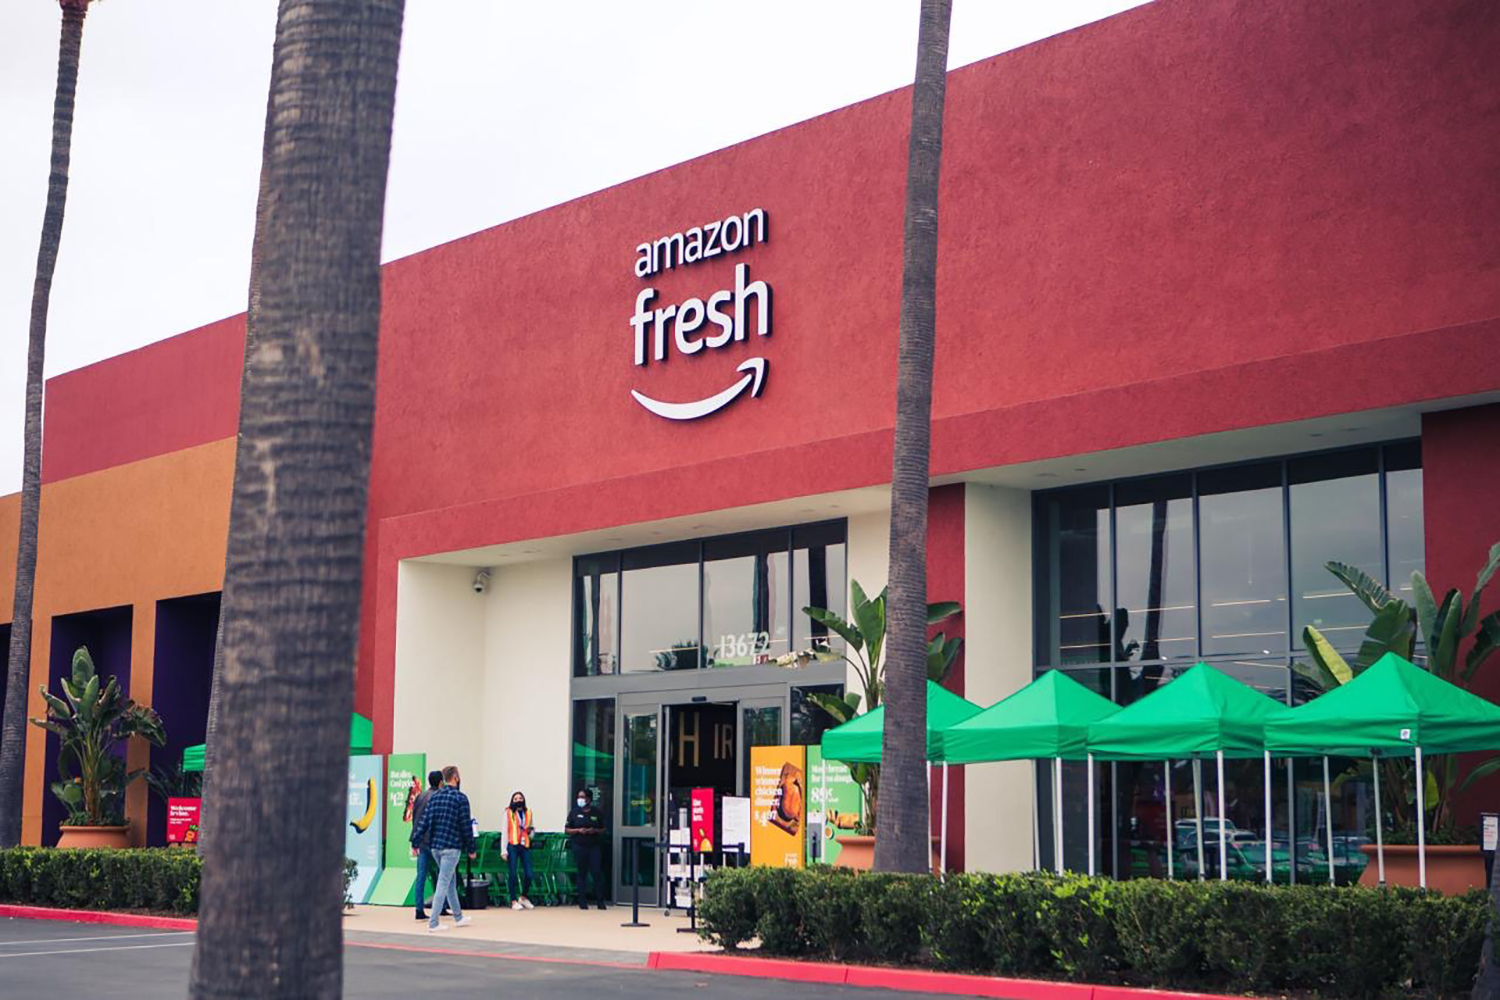 Amazon Fresh Opens at The Market Place in Irvine